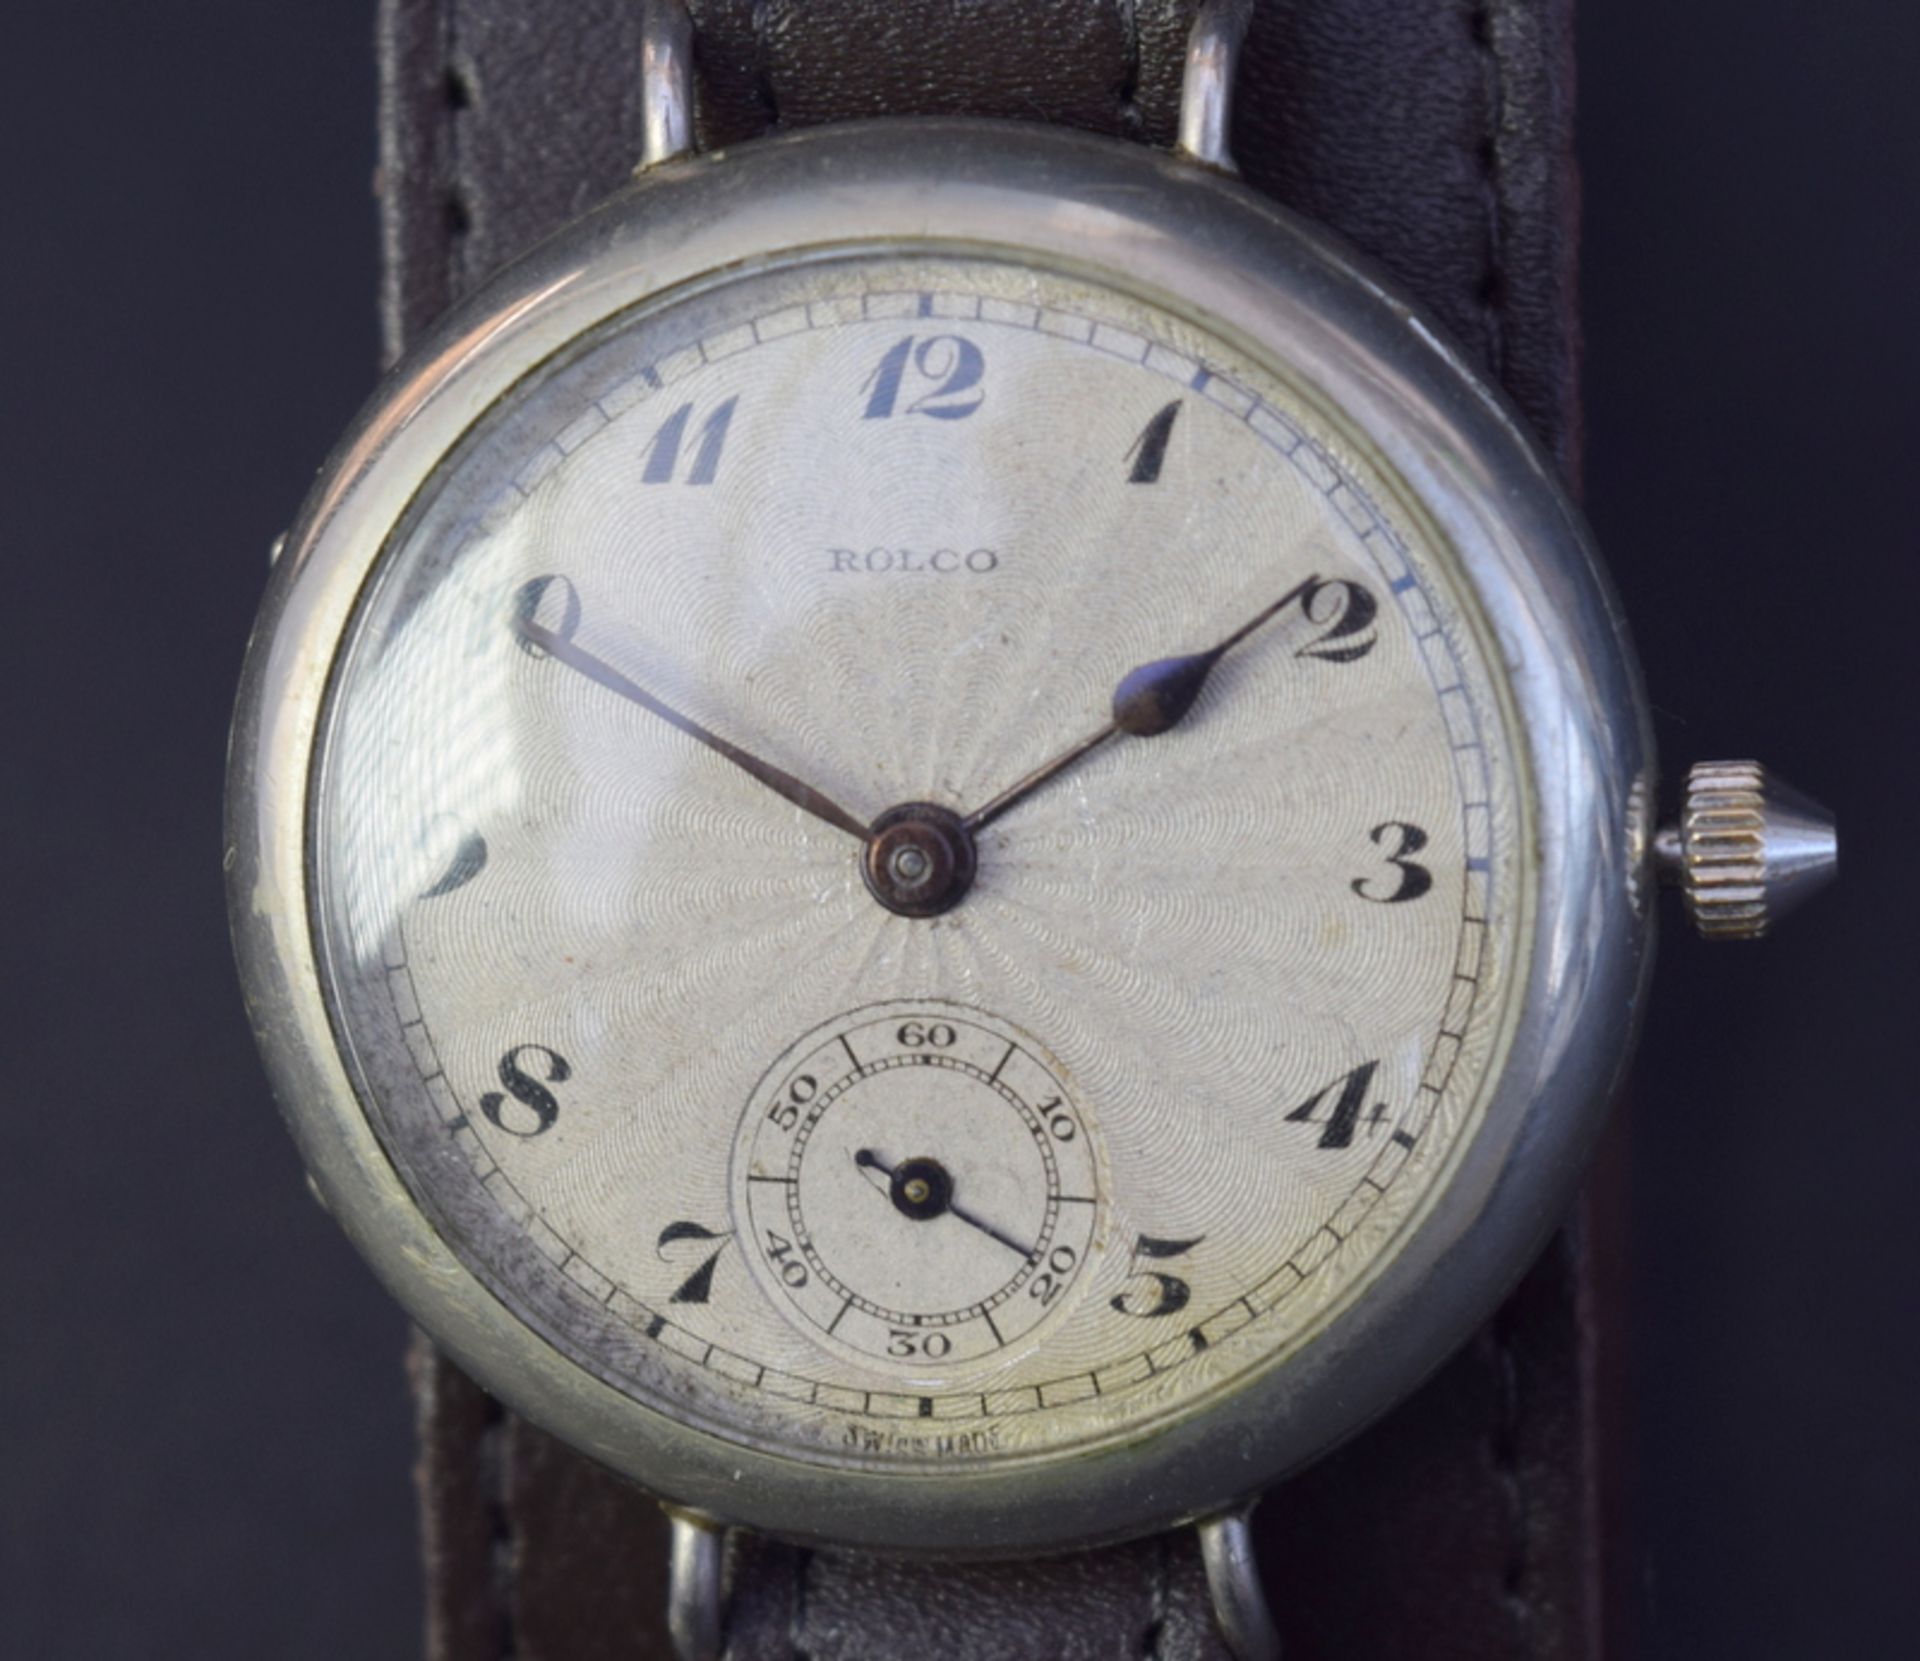 Rolco (Early Rolex) Trench Watch